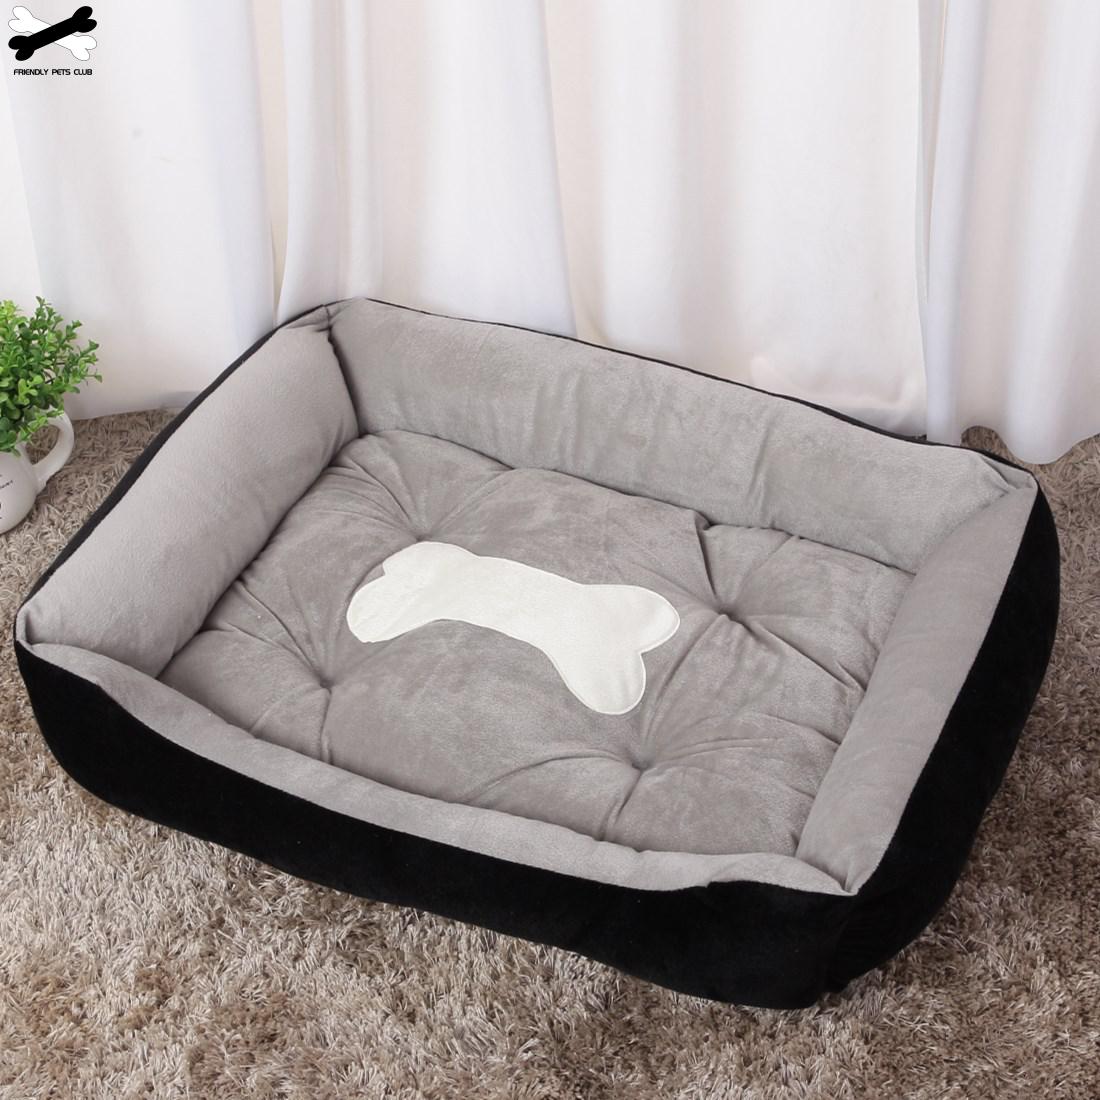 Bone-Pet-Bed-Warm-Pet-Products-For-Small-Medium-Large-Dog-Soft-Pet-Bed-For-Dogs